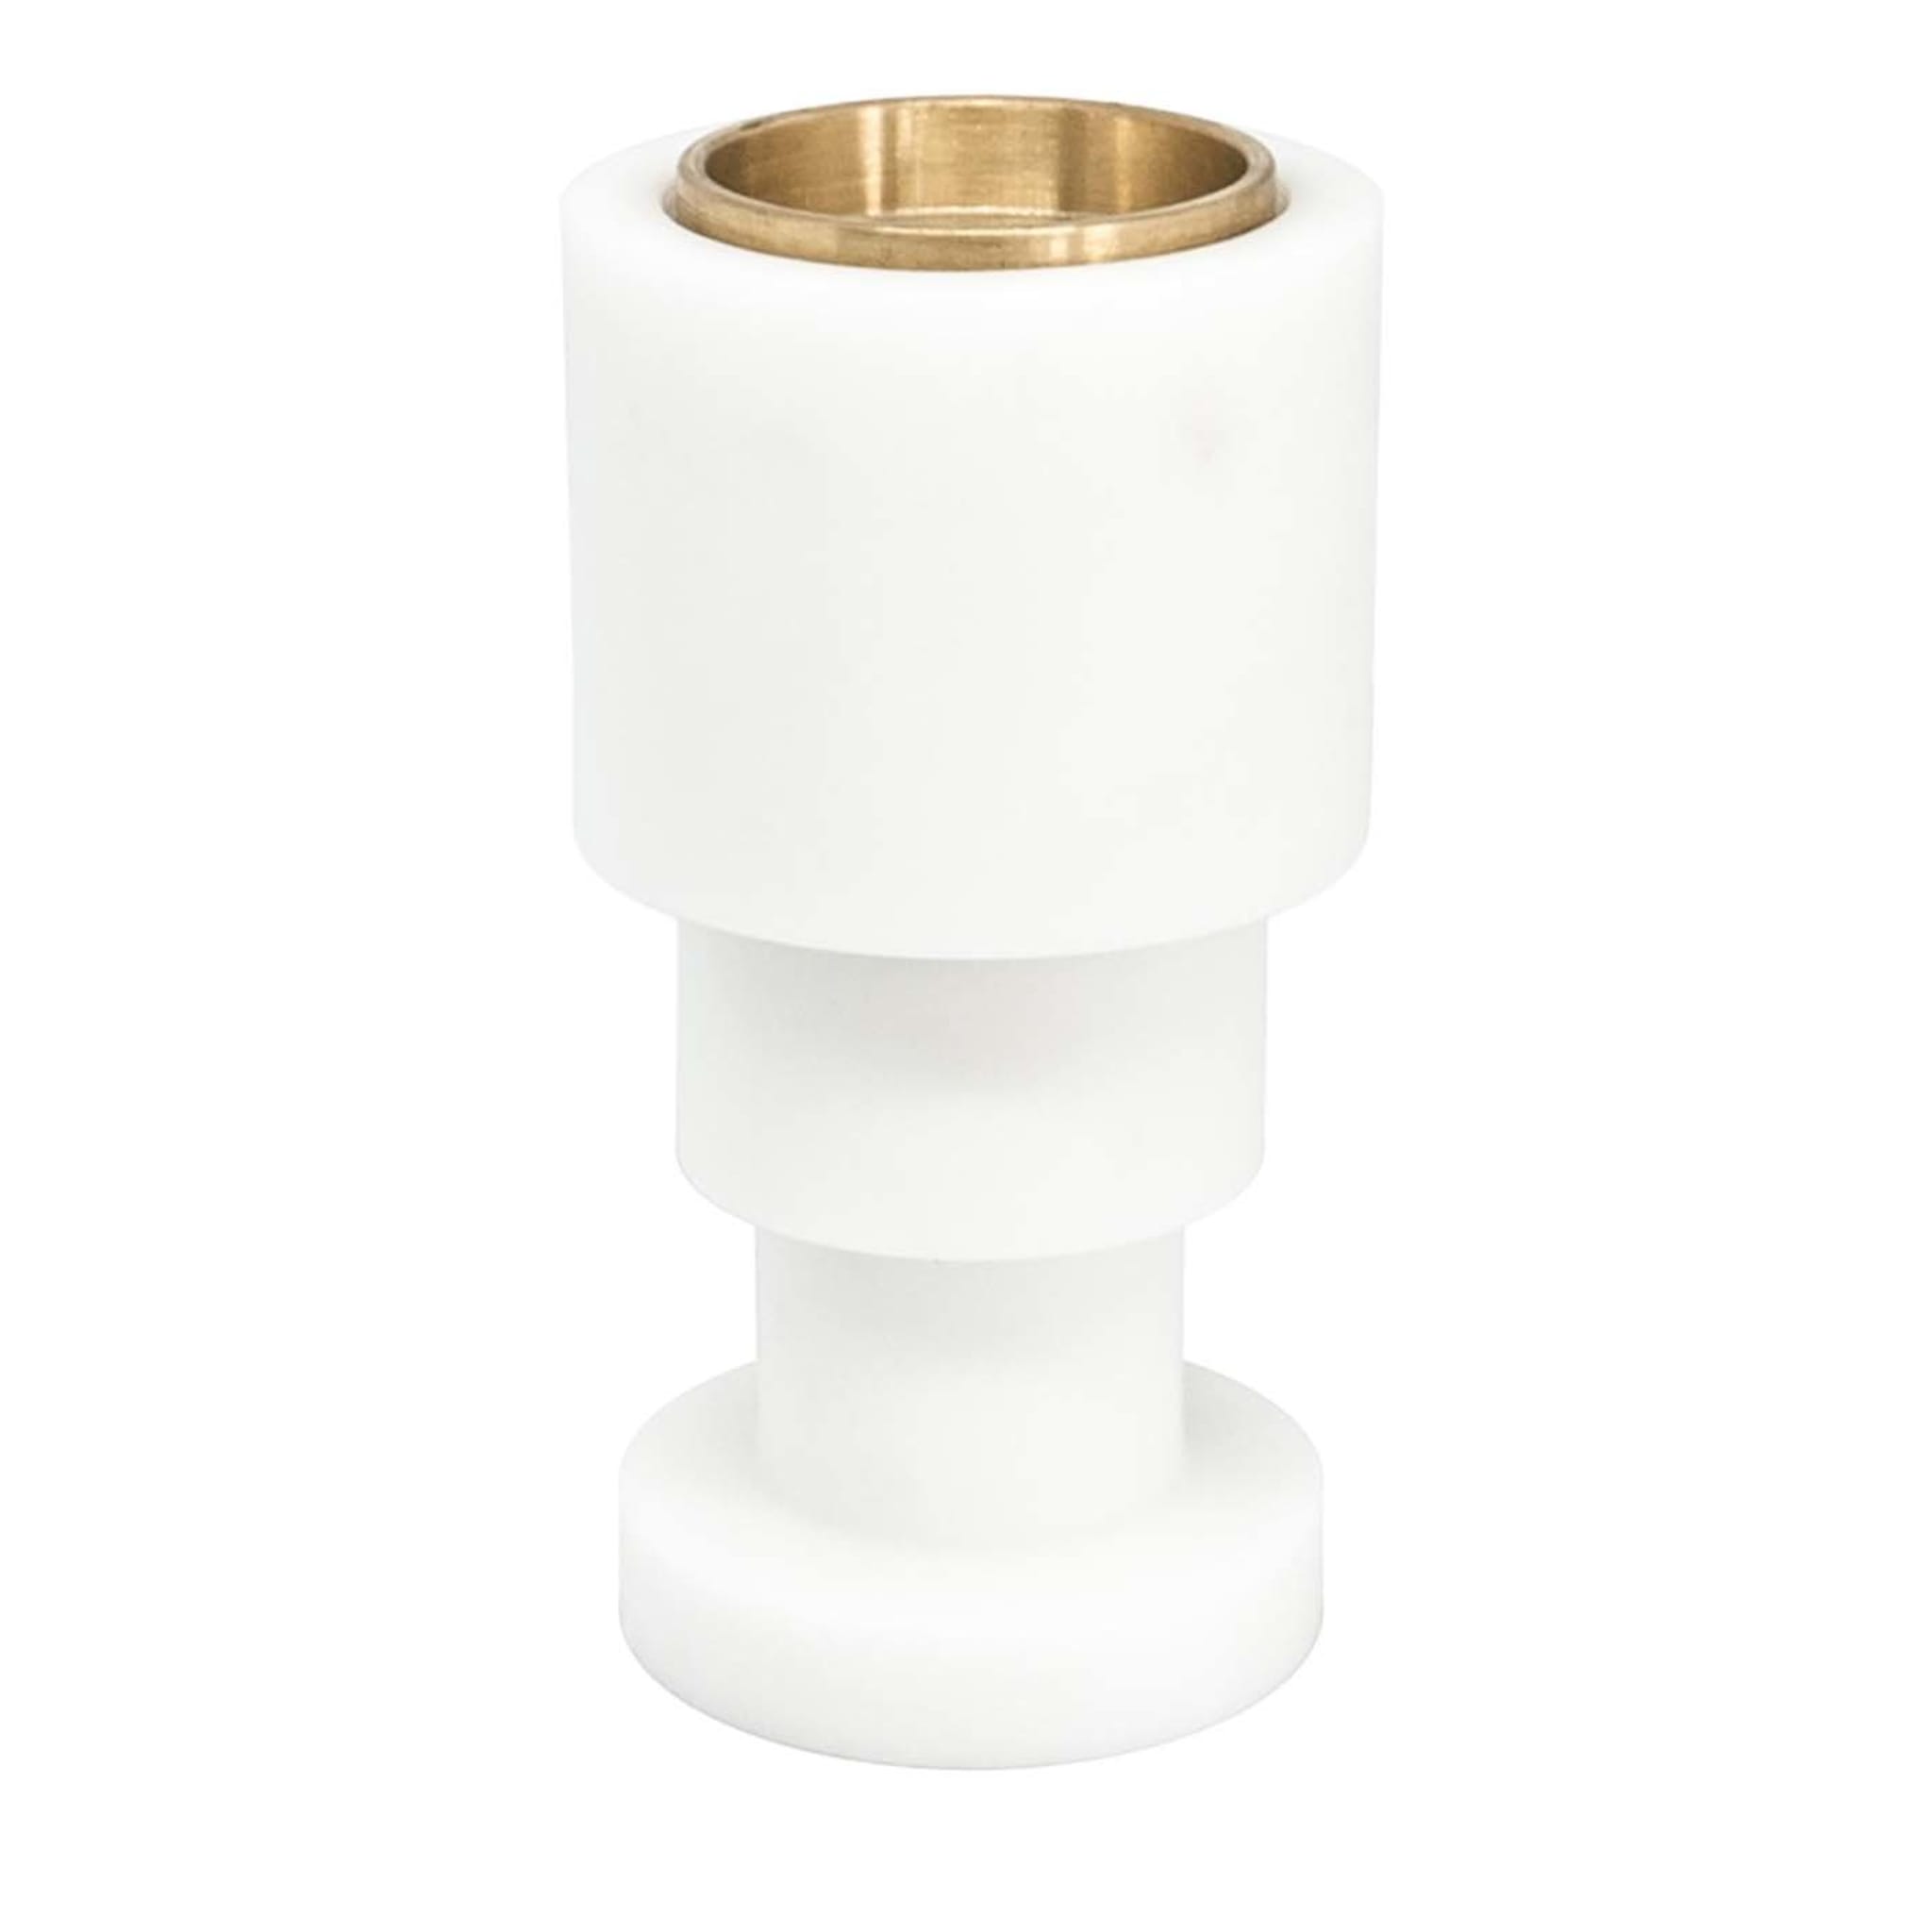 Carrara Marble and Brass Candleholder by Jacopo Simonetti - Main view